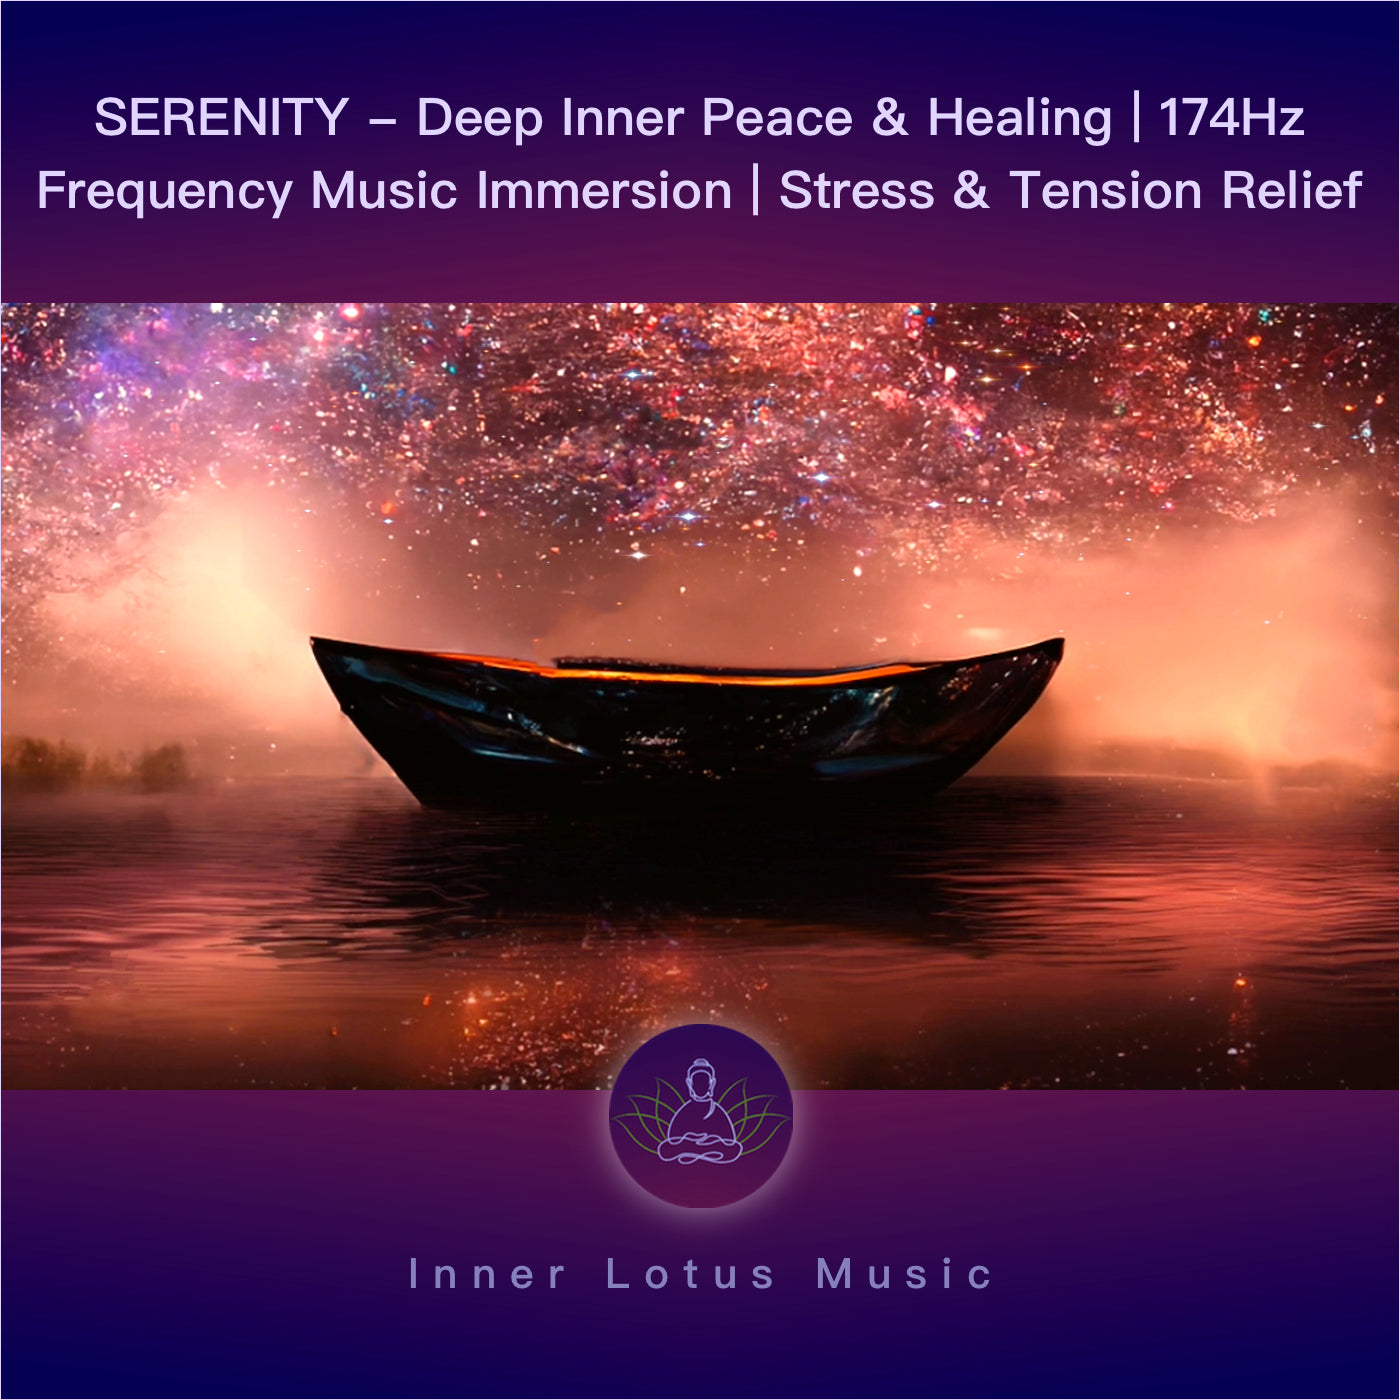 SERENITY - Deep Inner Peace & Healing | 174Hz Frequency Music Immersion | Stress & Tension Relief